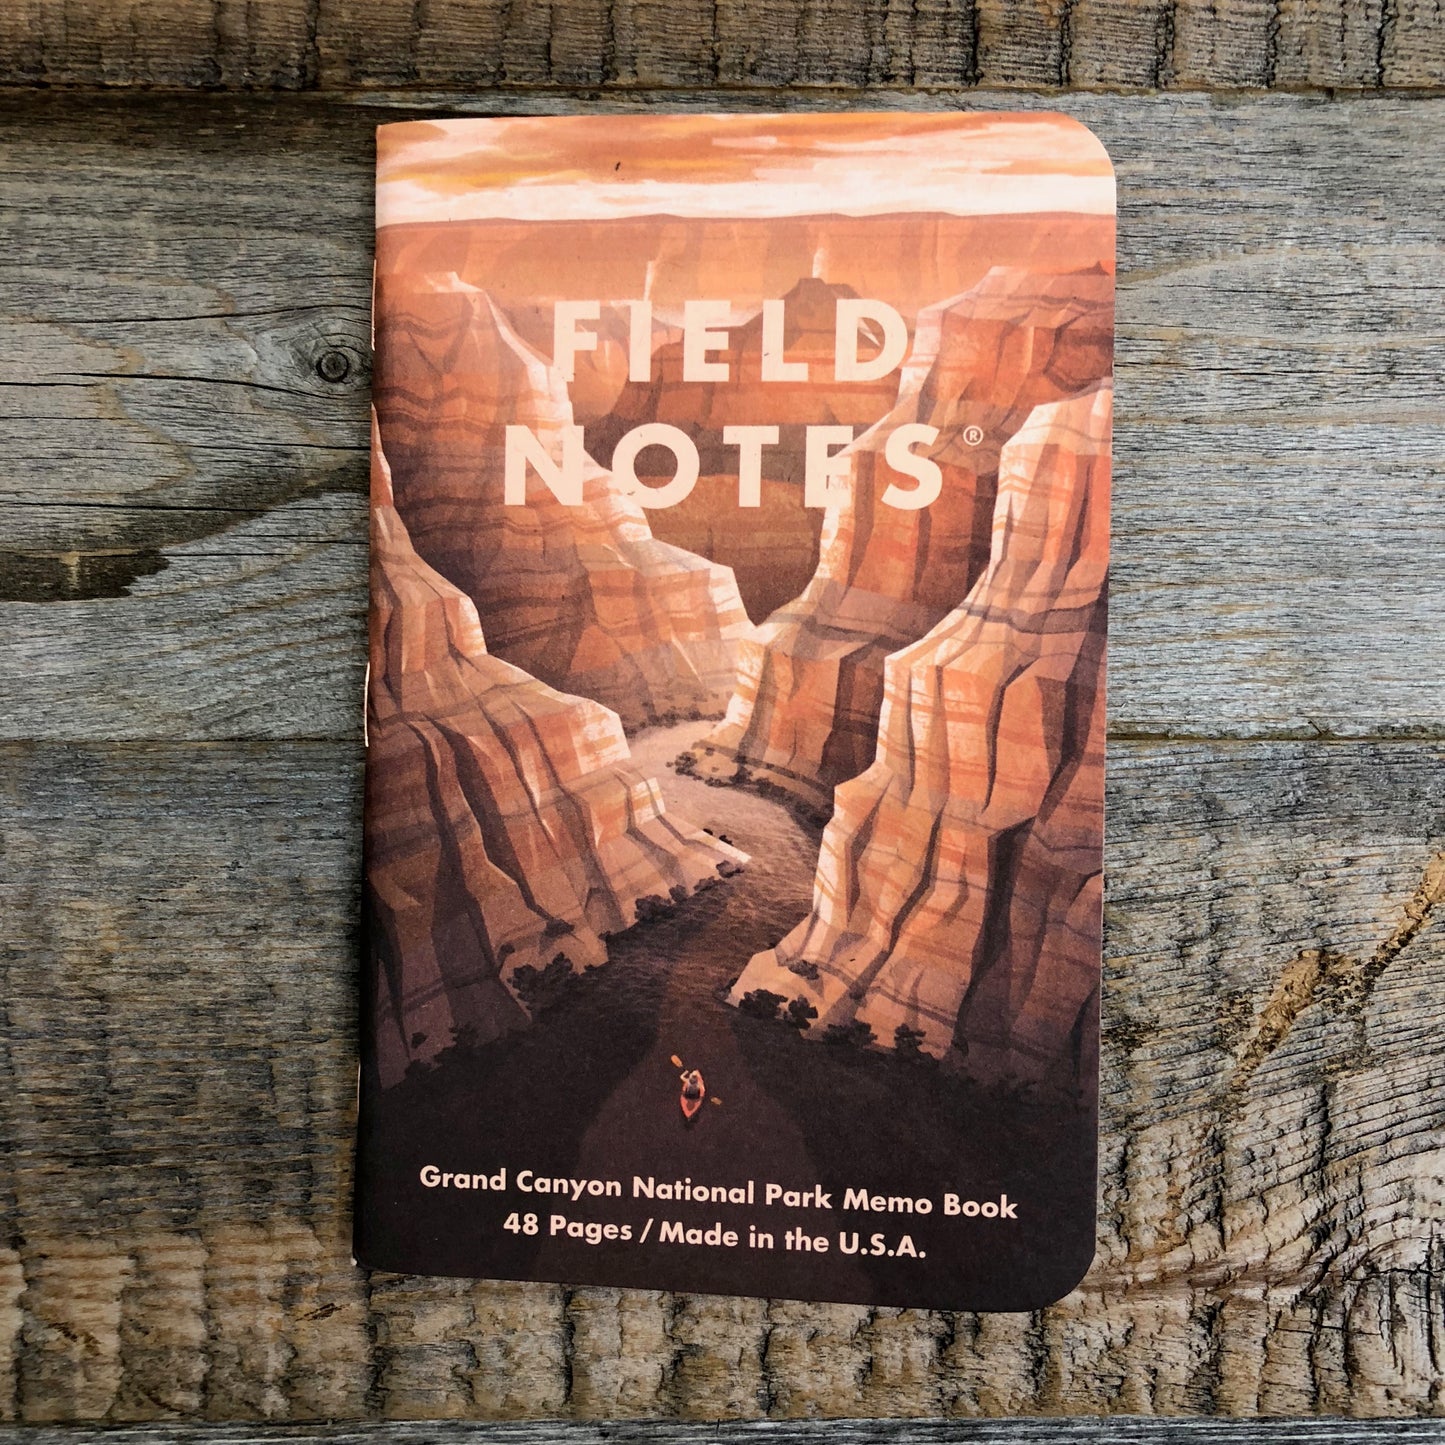 NATIONAL PARKS Series B - Field Notes - 3-Pak